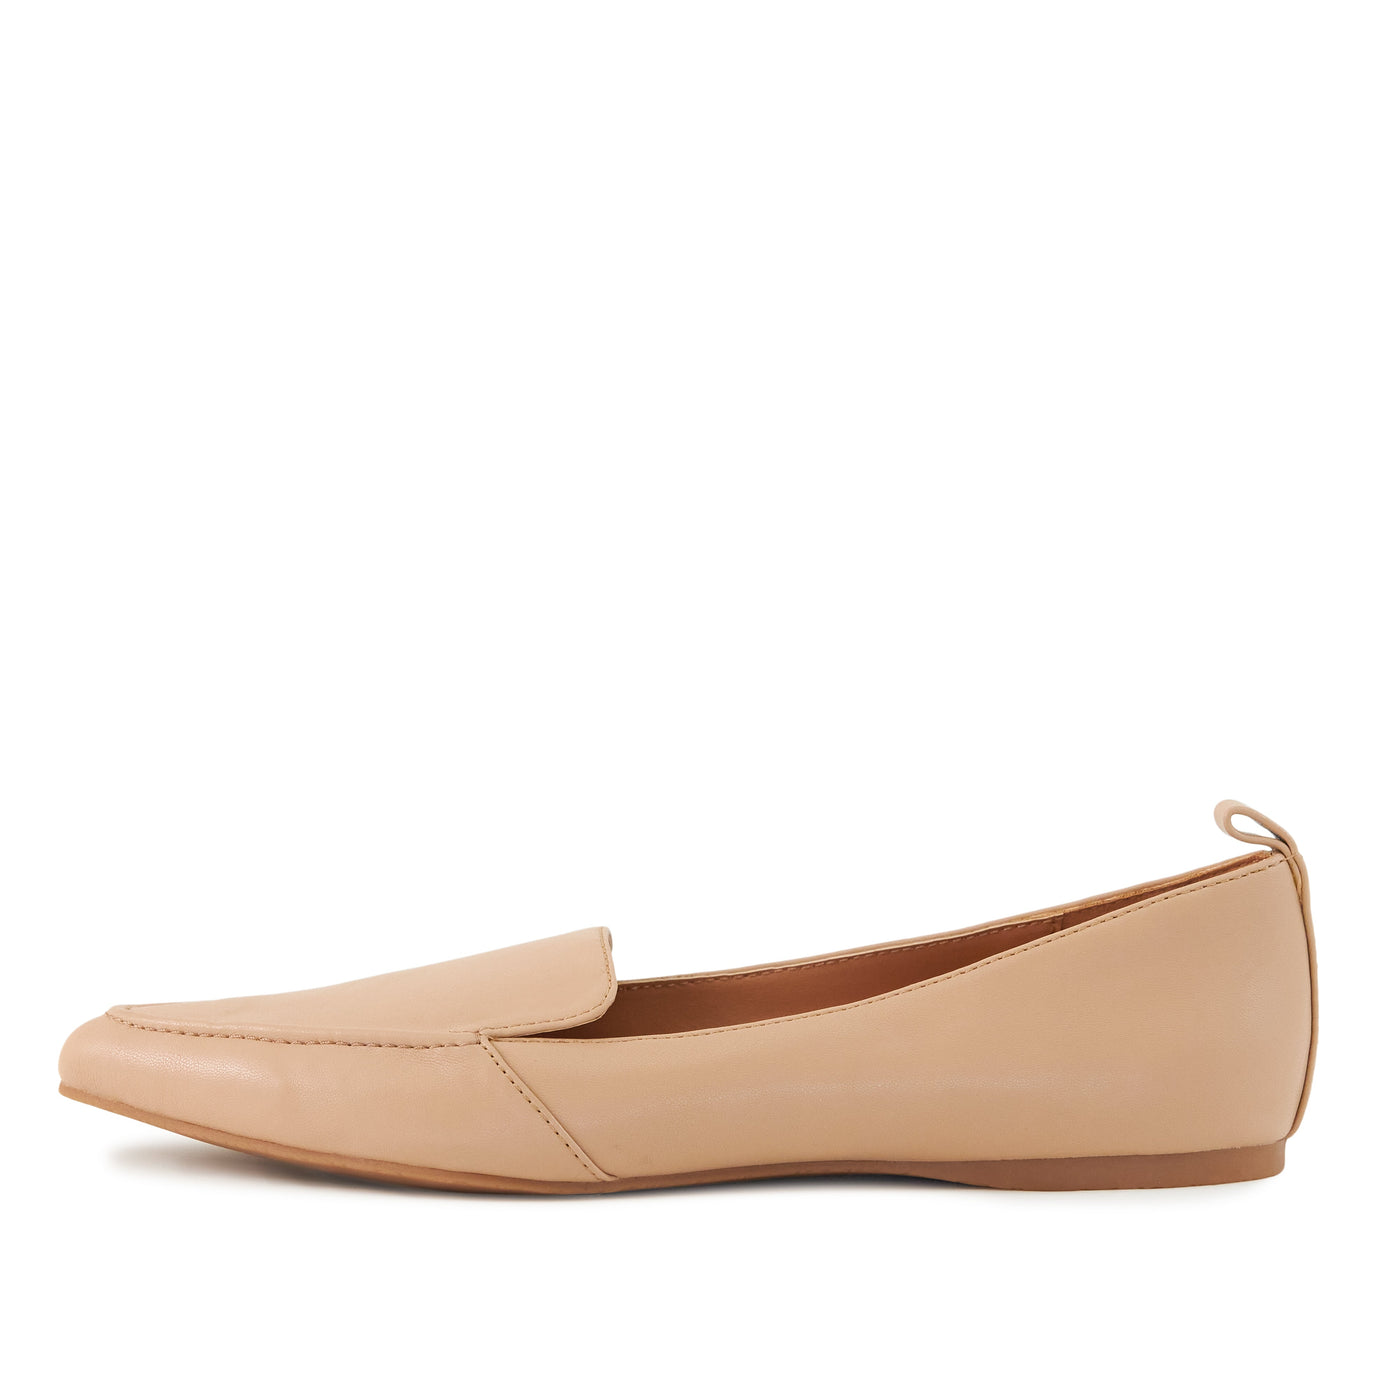 Women's Flat Socialite Natural by Nest Shoes